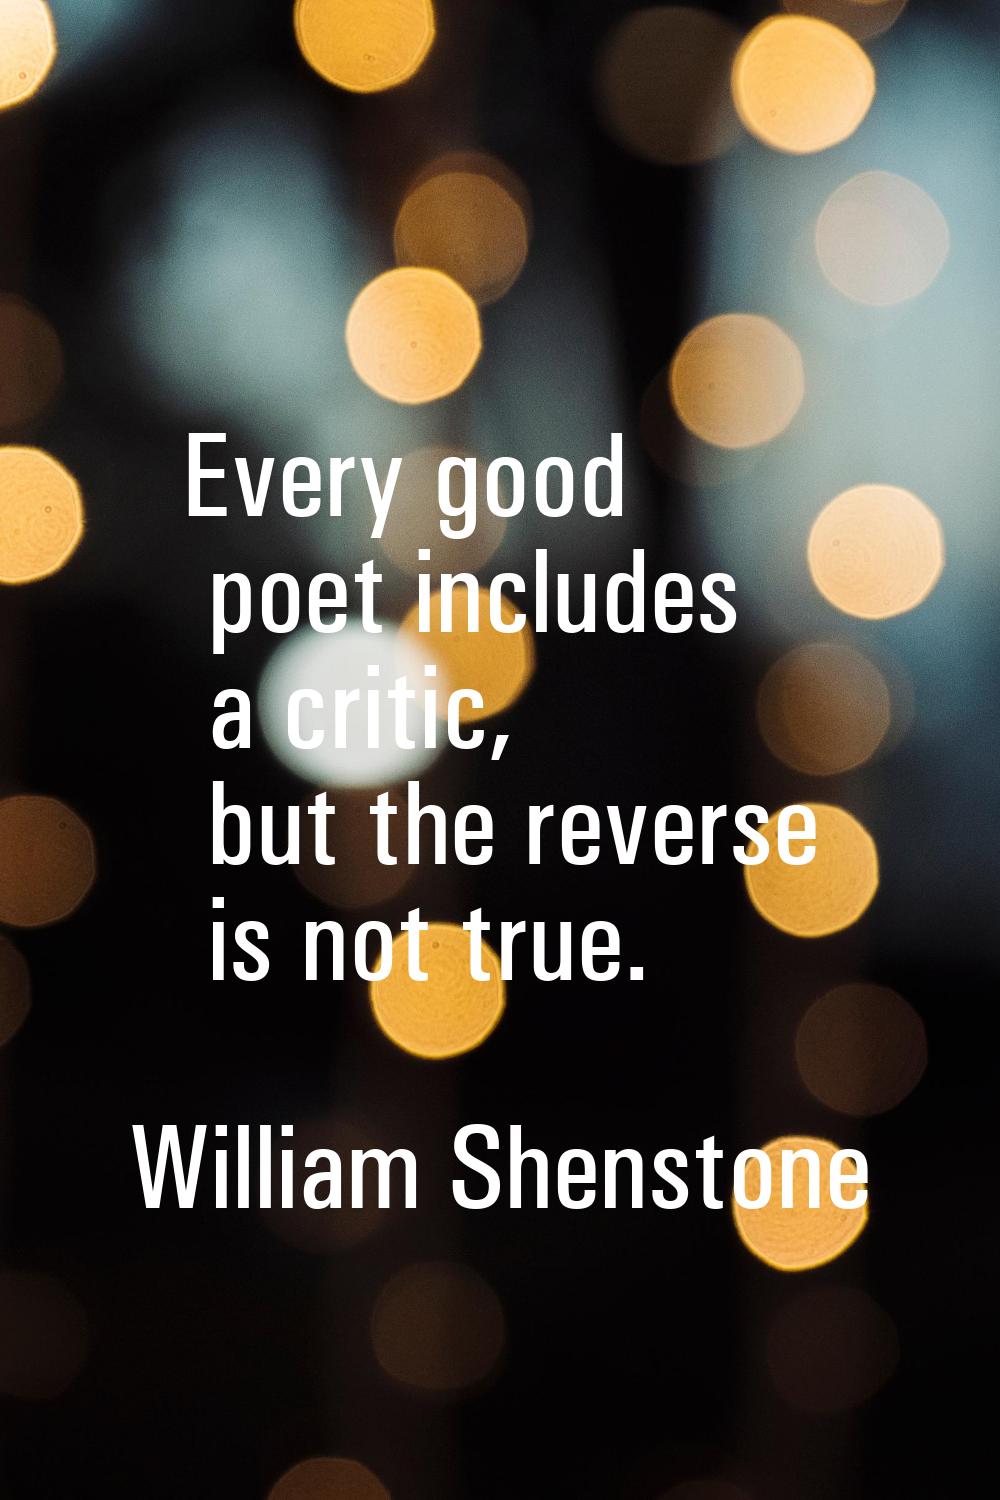 Every good poet includes a critic, but the reverse is not true.